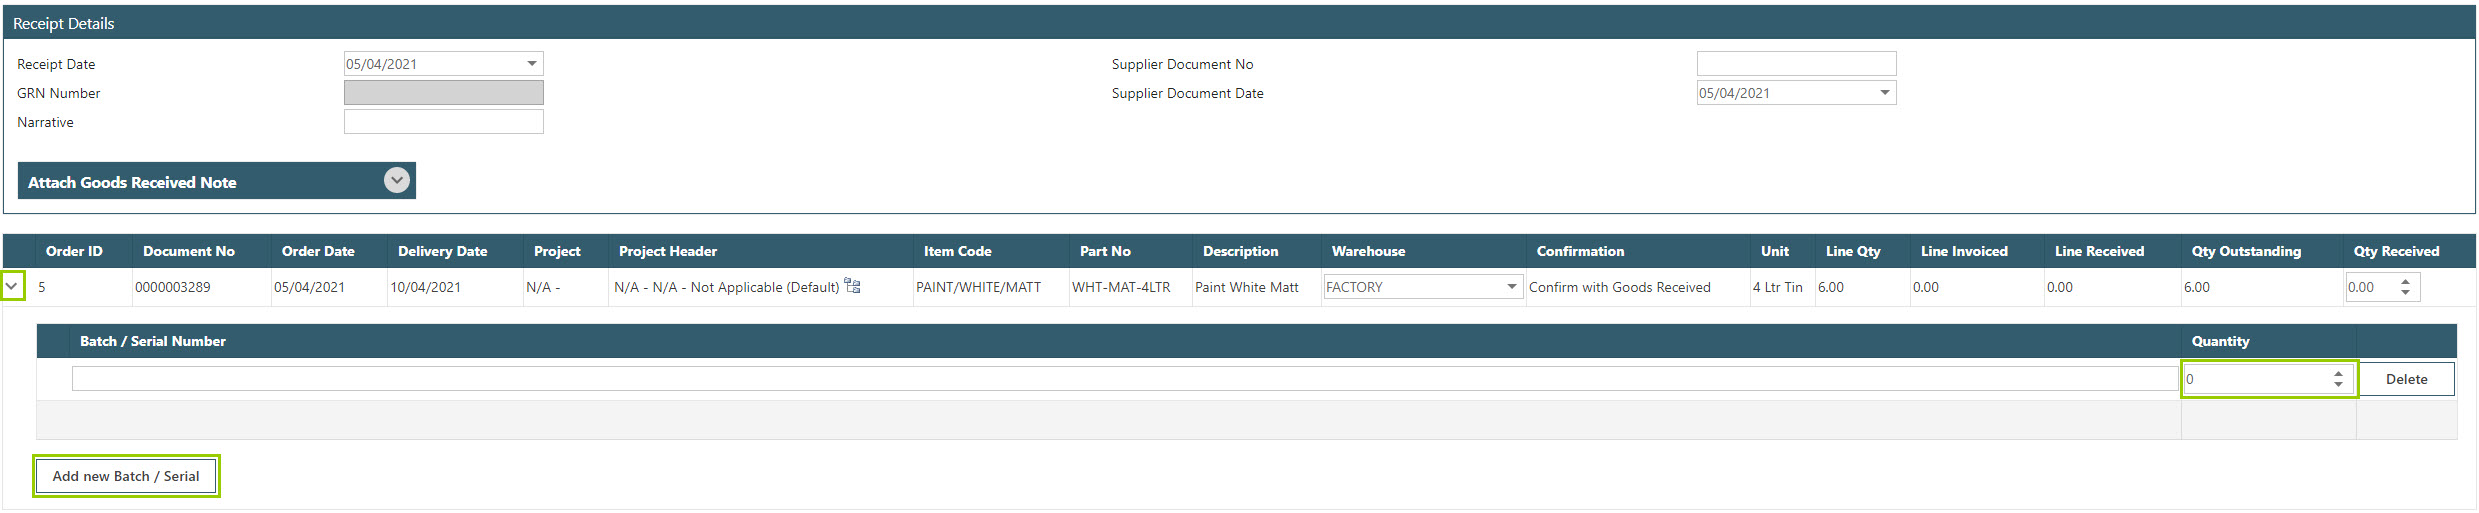 Sicon WAP Purchase Requisitions Help and User Guide - Requisition HUG Section 10.2 Image 1